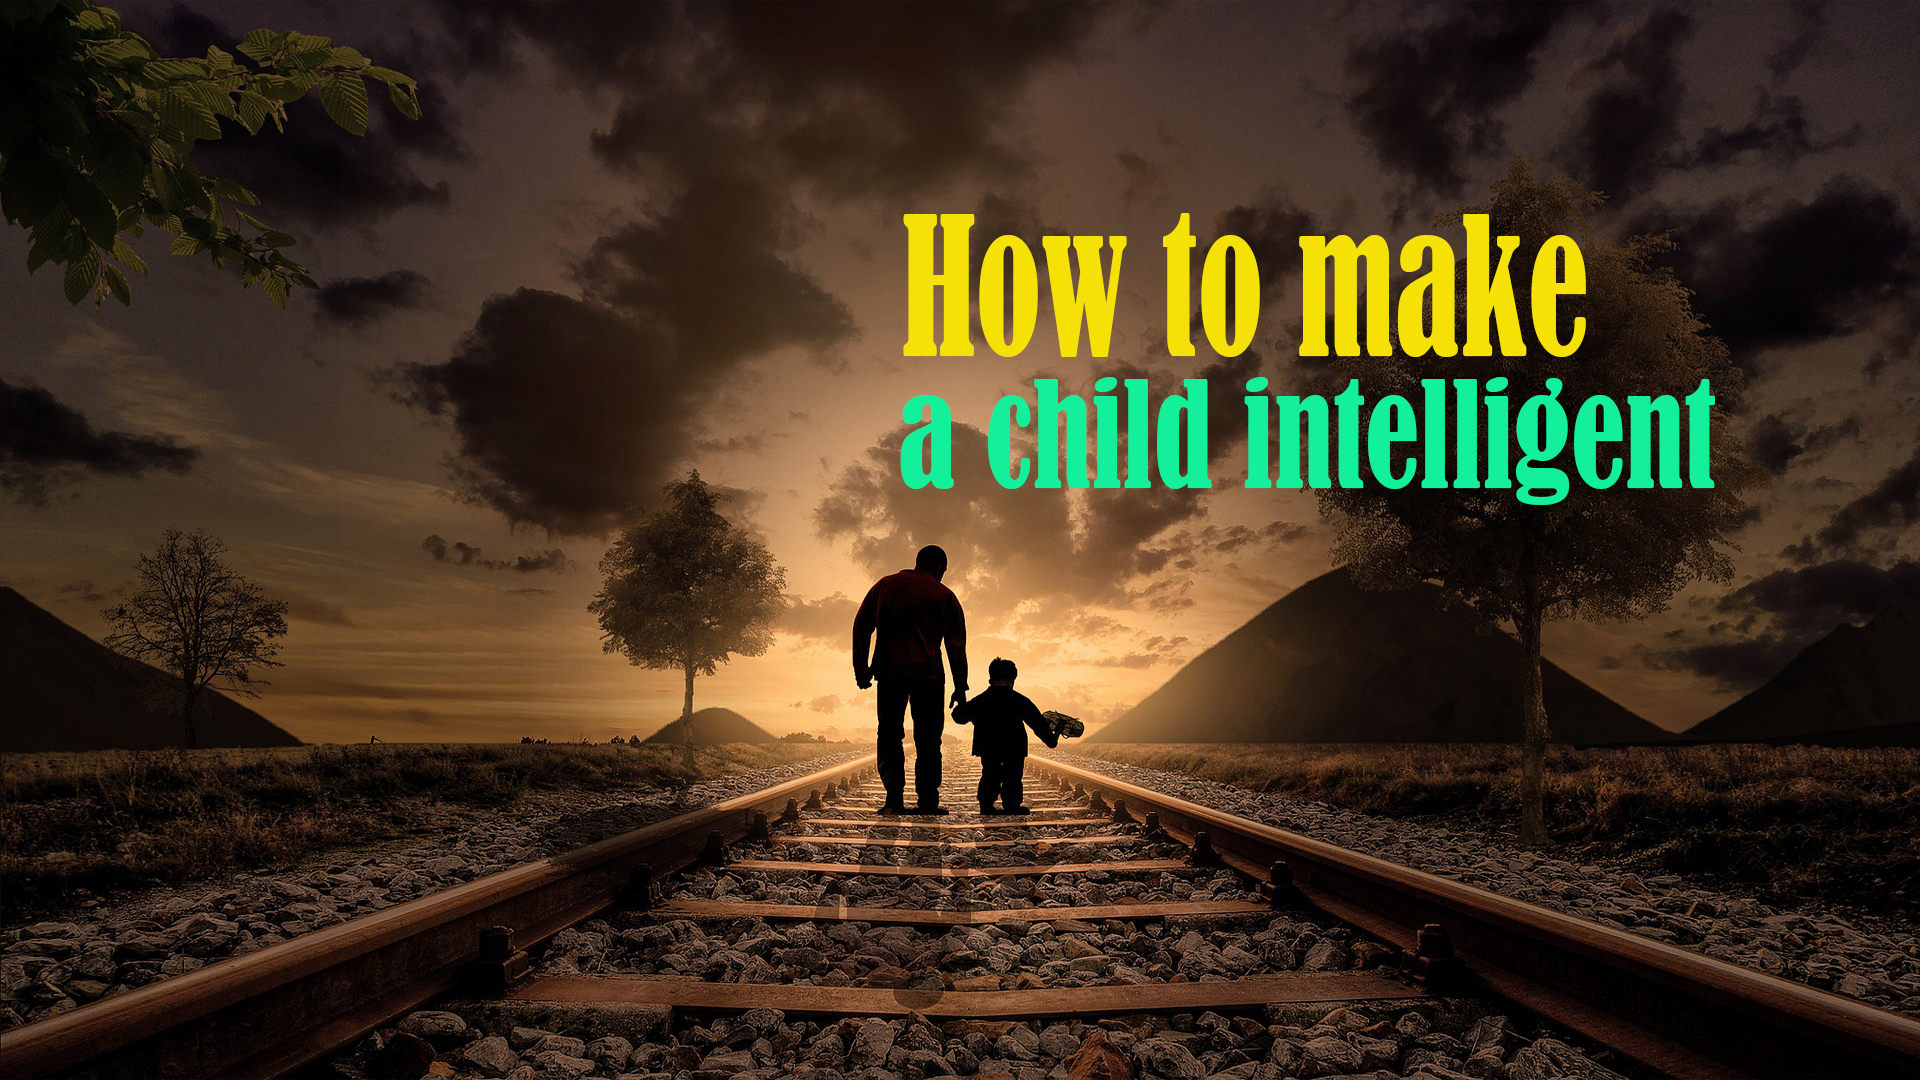 How to make a child intelligent